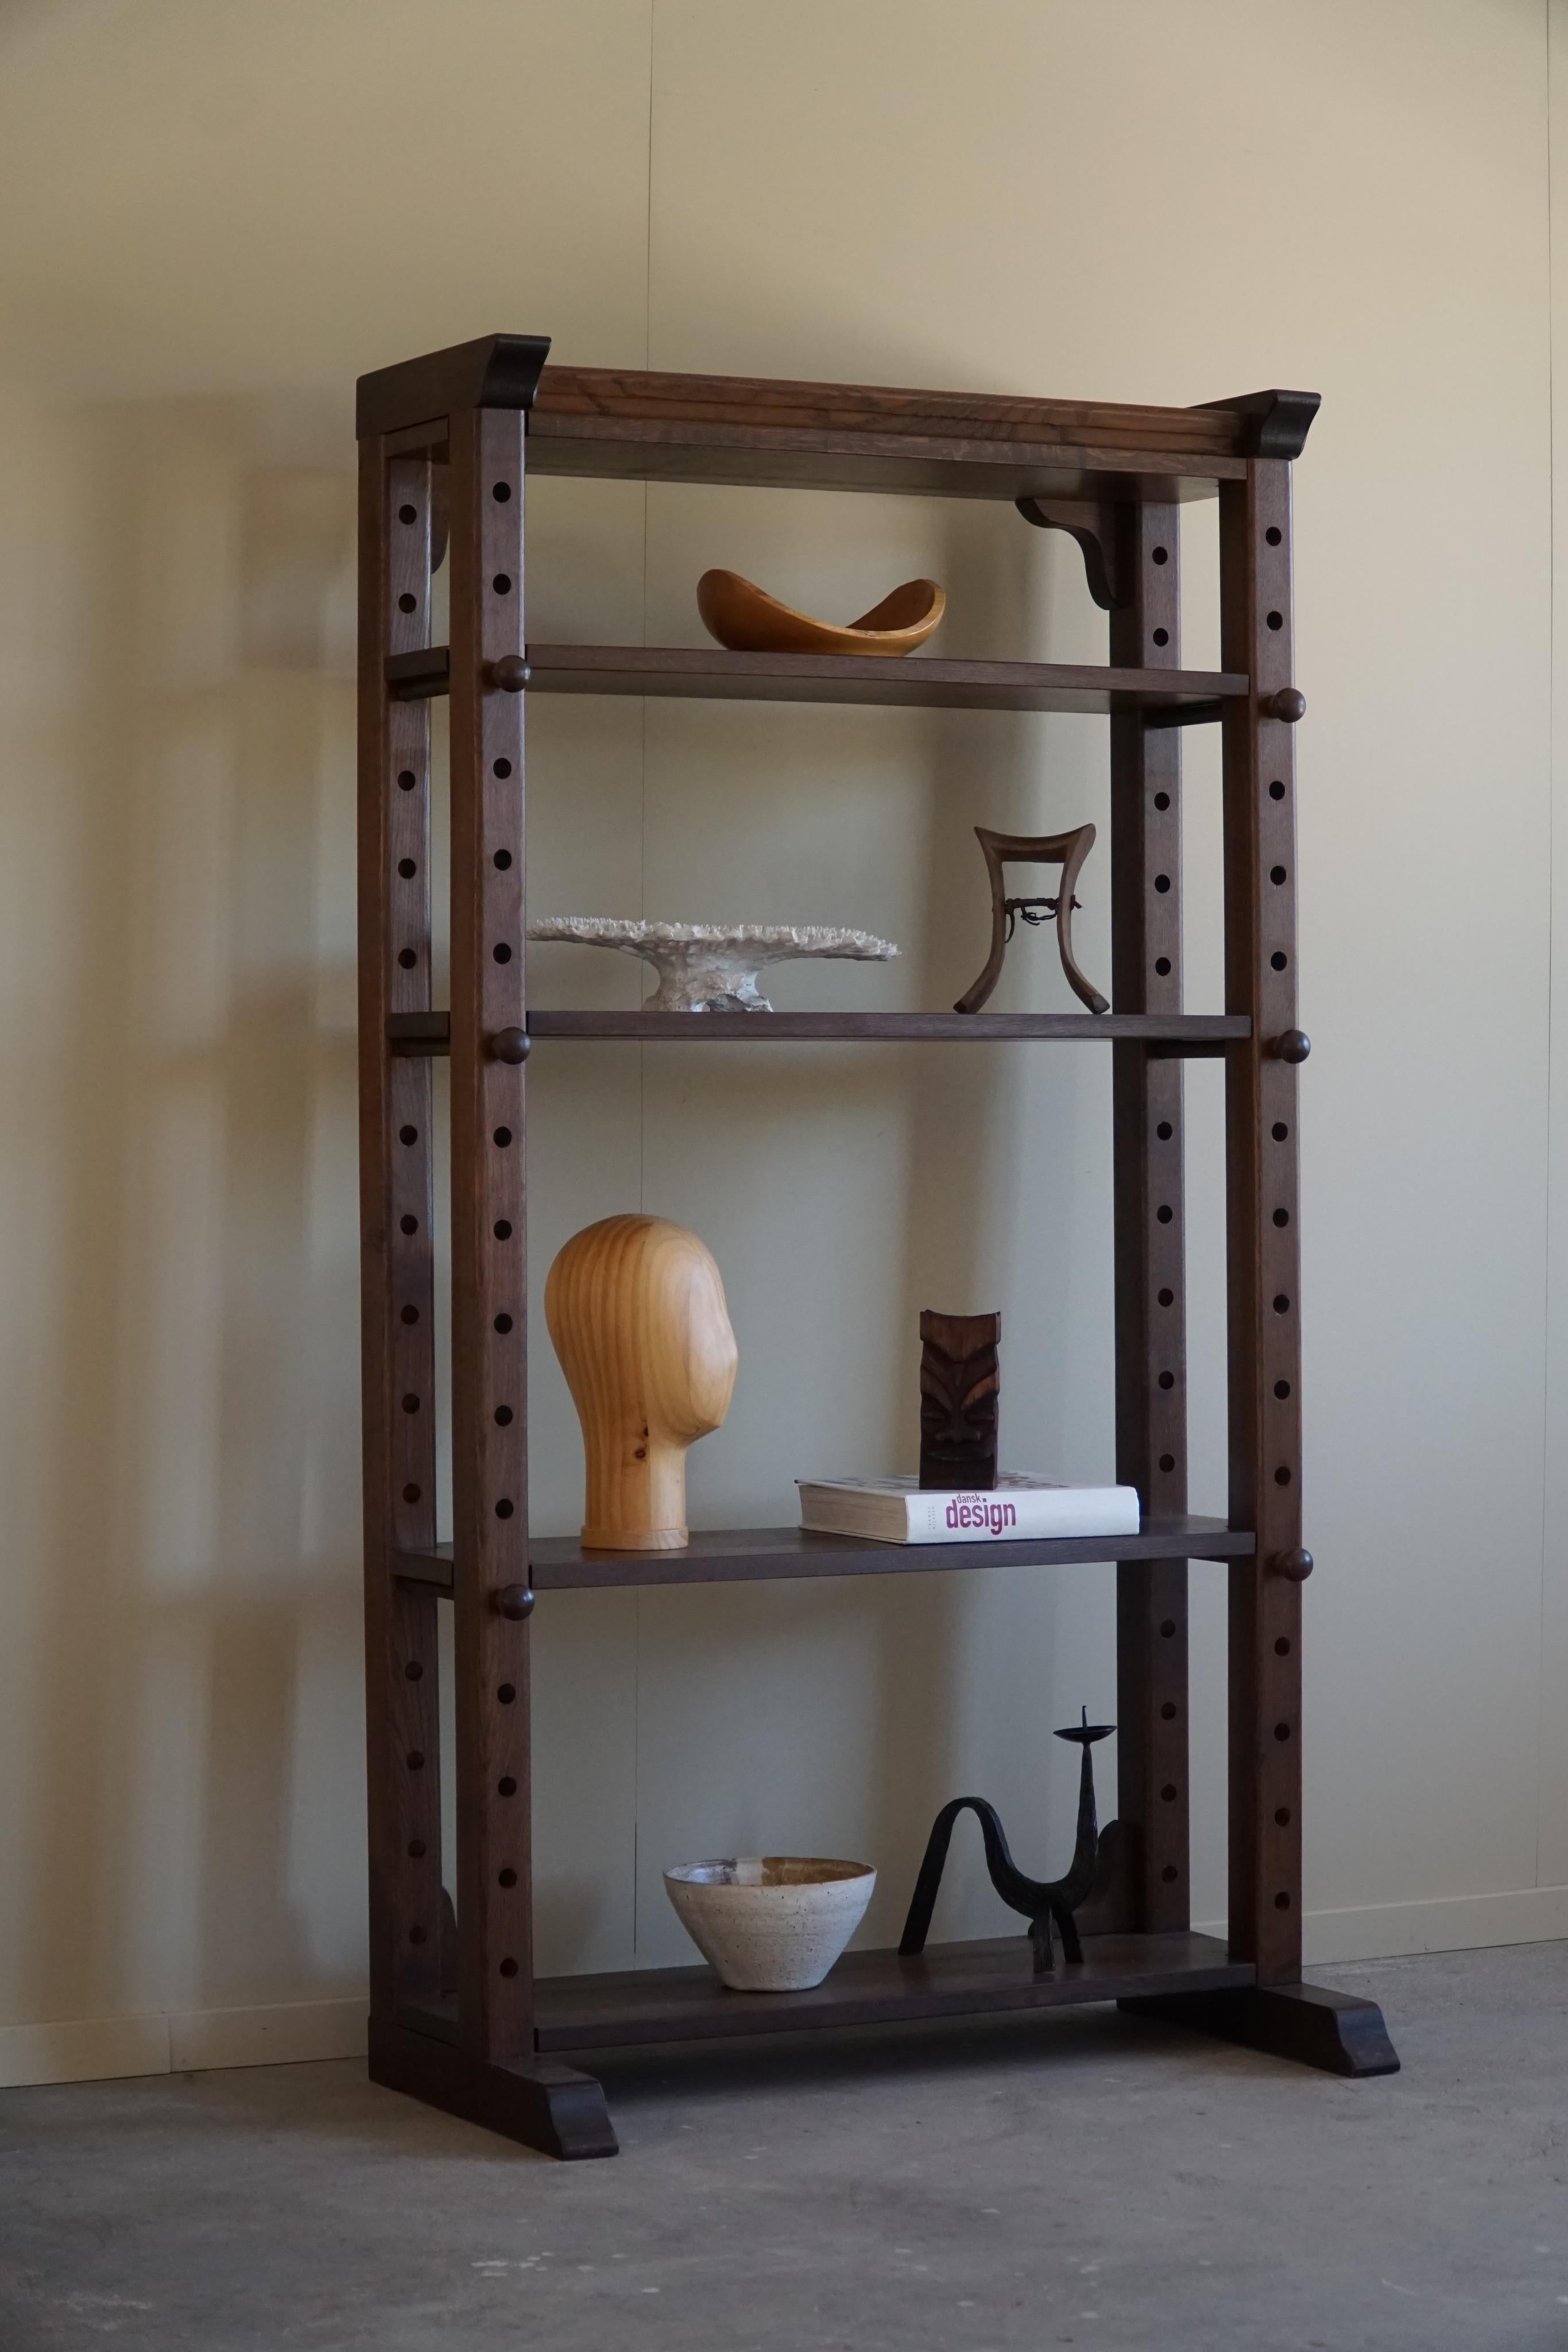 Freestanding Mid-Century Modern Shelf Unit in Solid Wood, Made in the 1960s For Sale 4